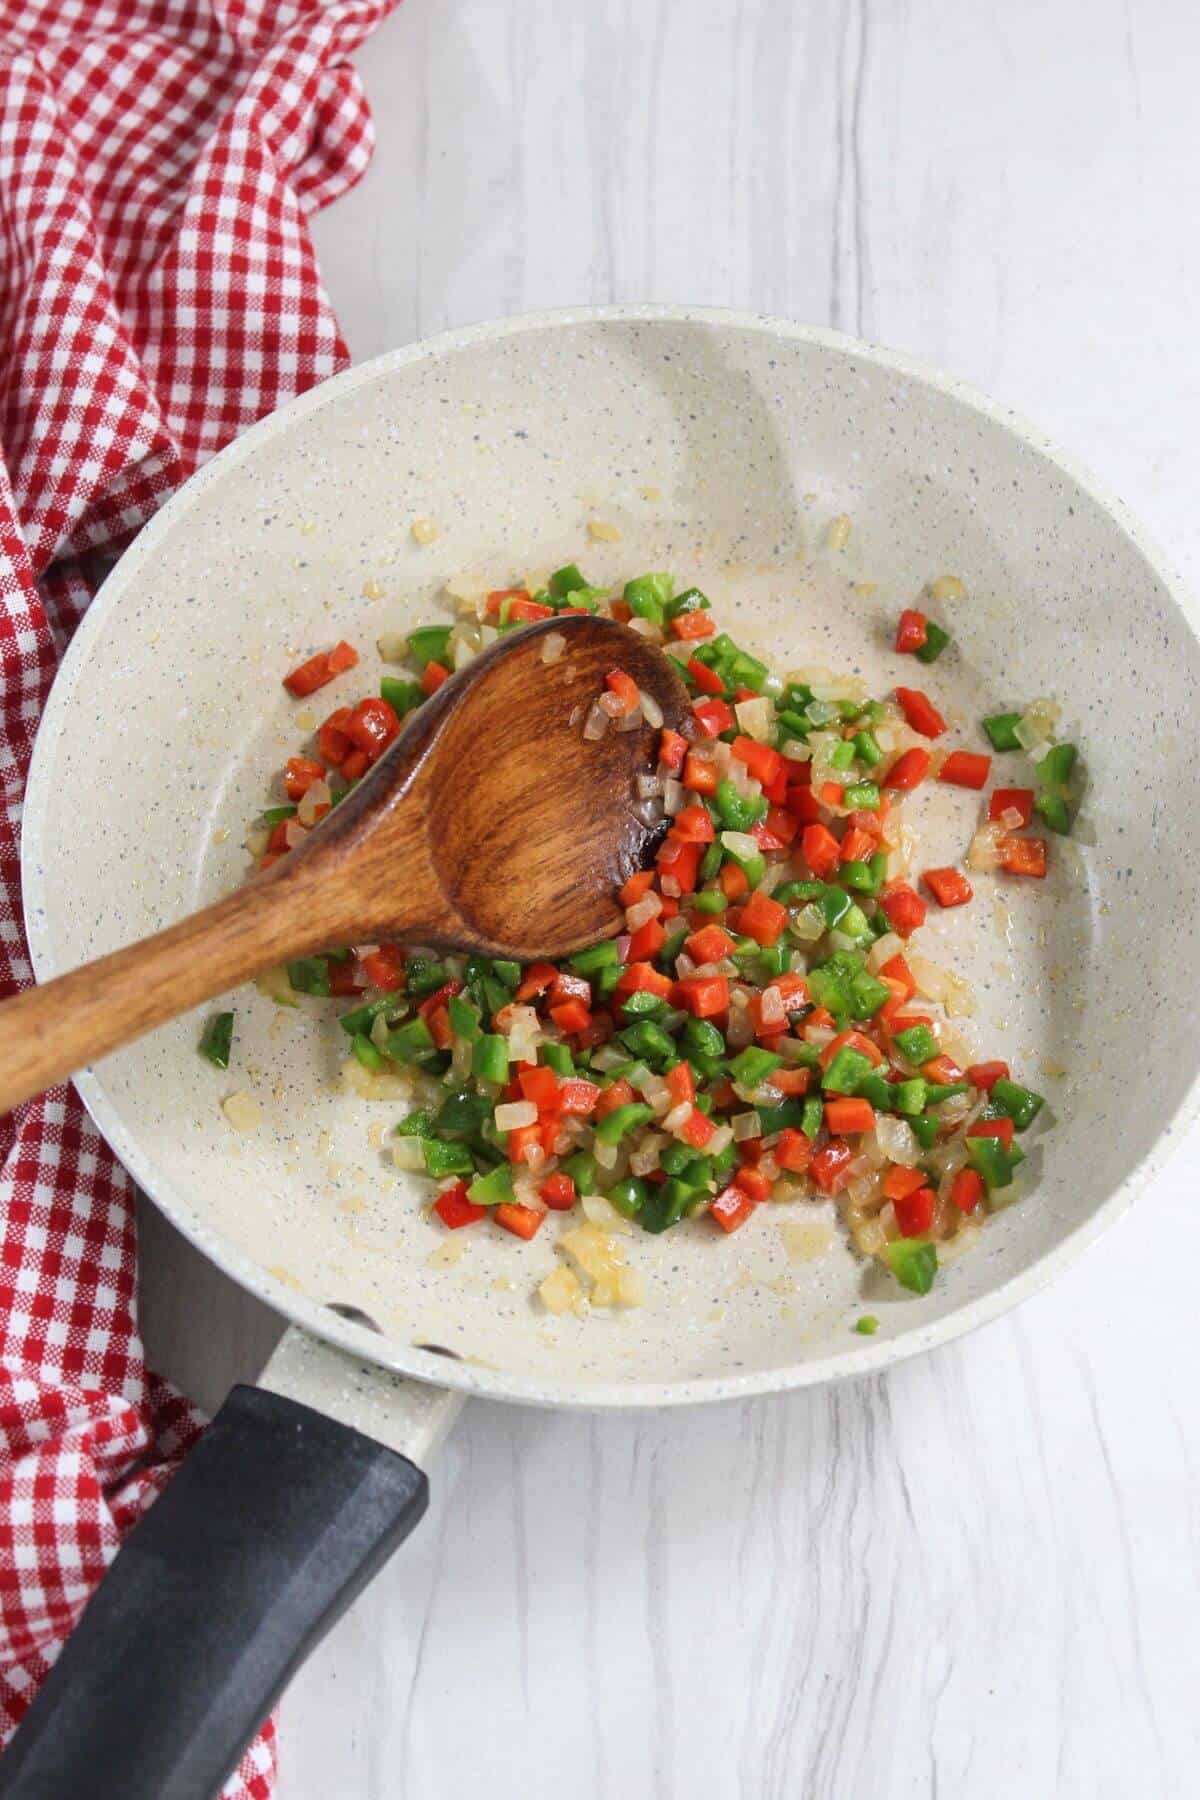 A frying pan with peppers and a wooden spoon.